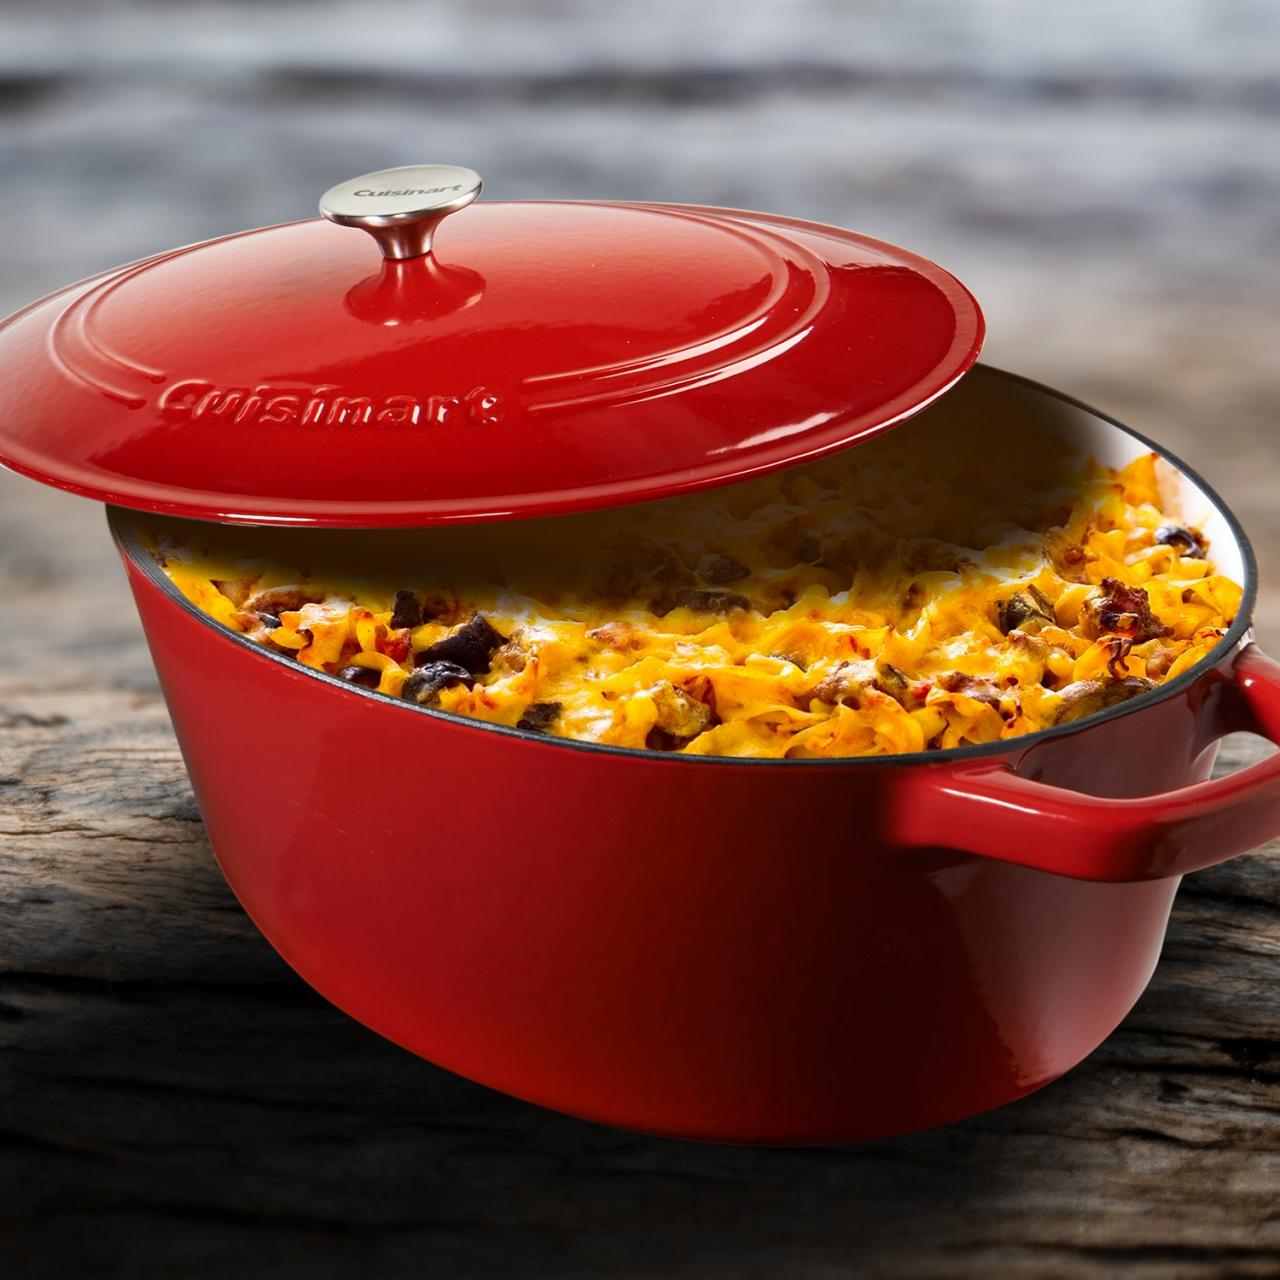 is having a sale on Cuisinart cast iron casserole and chicken fryers